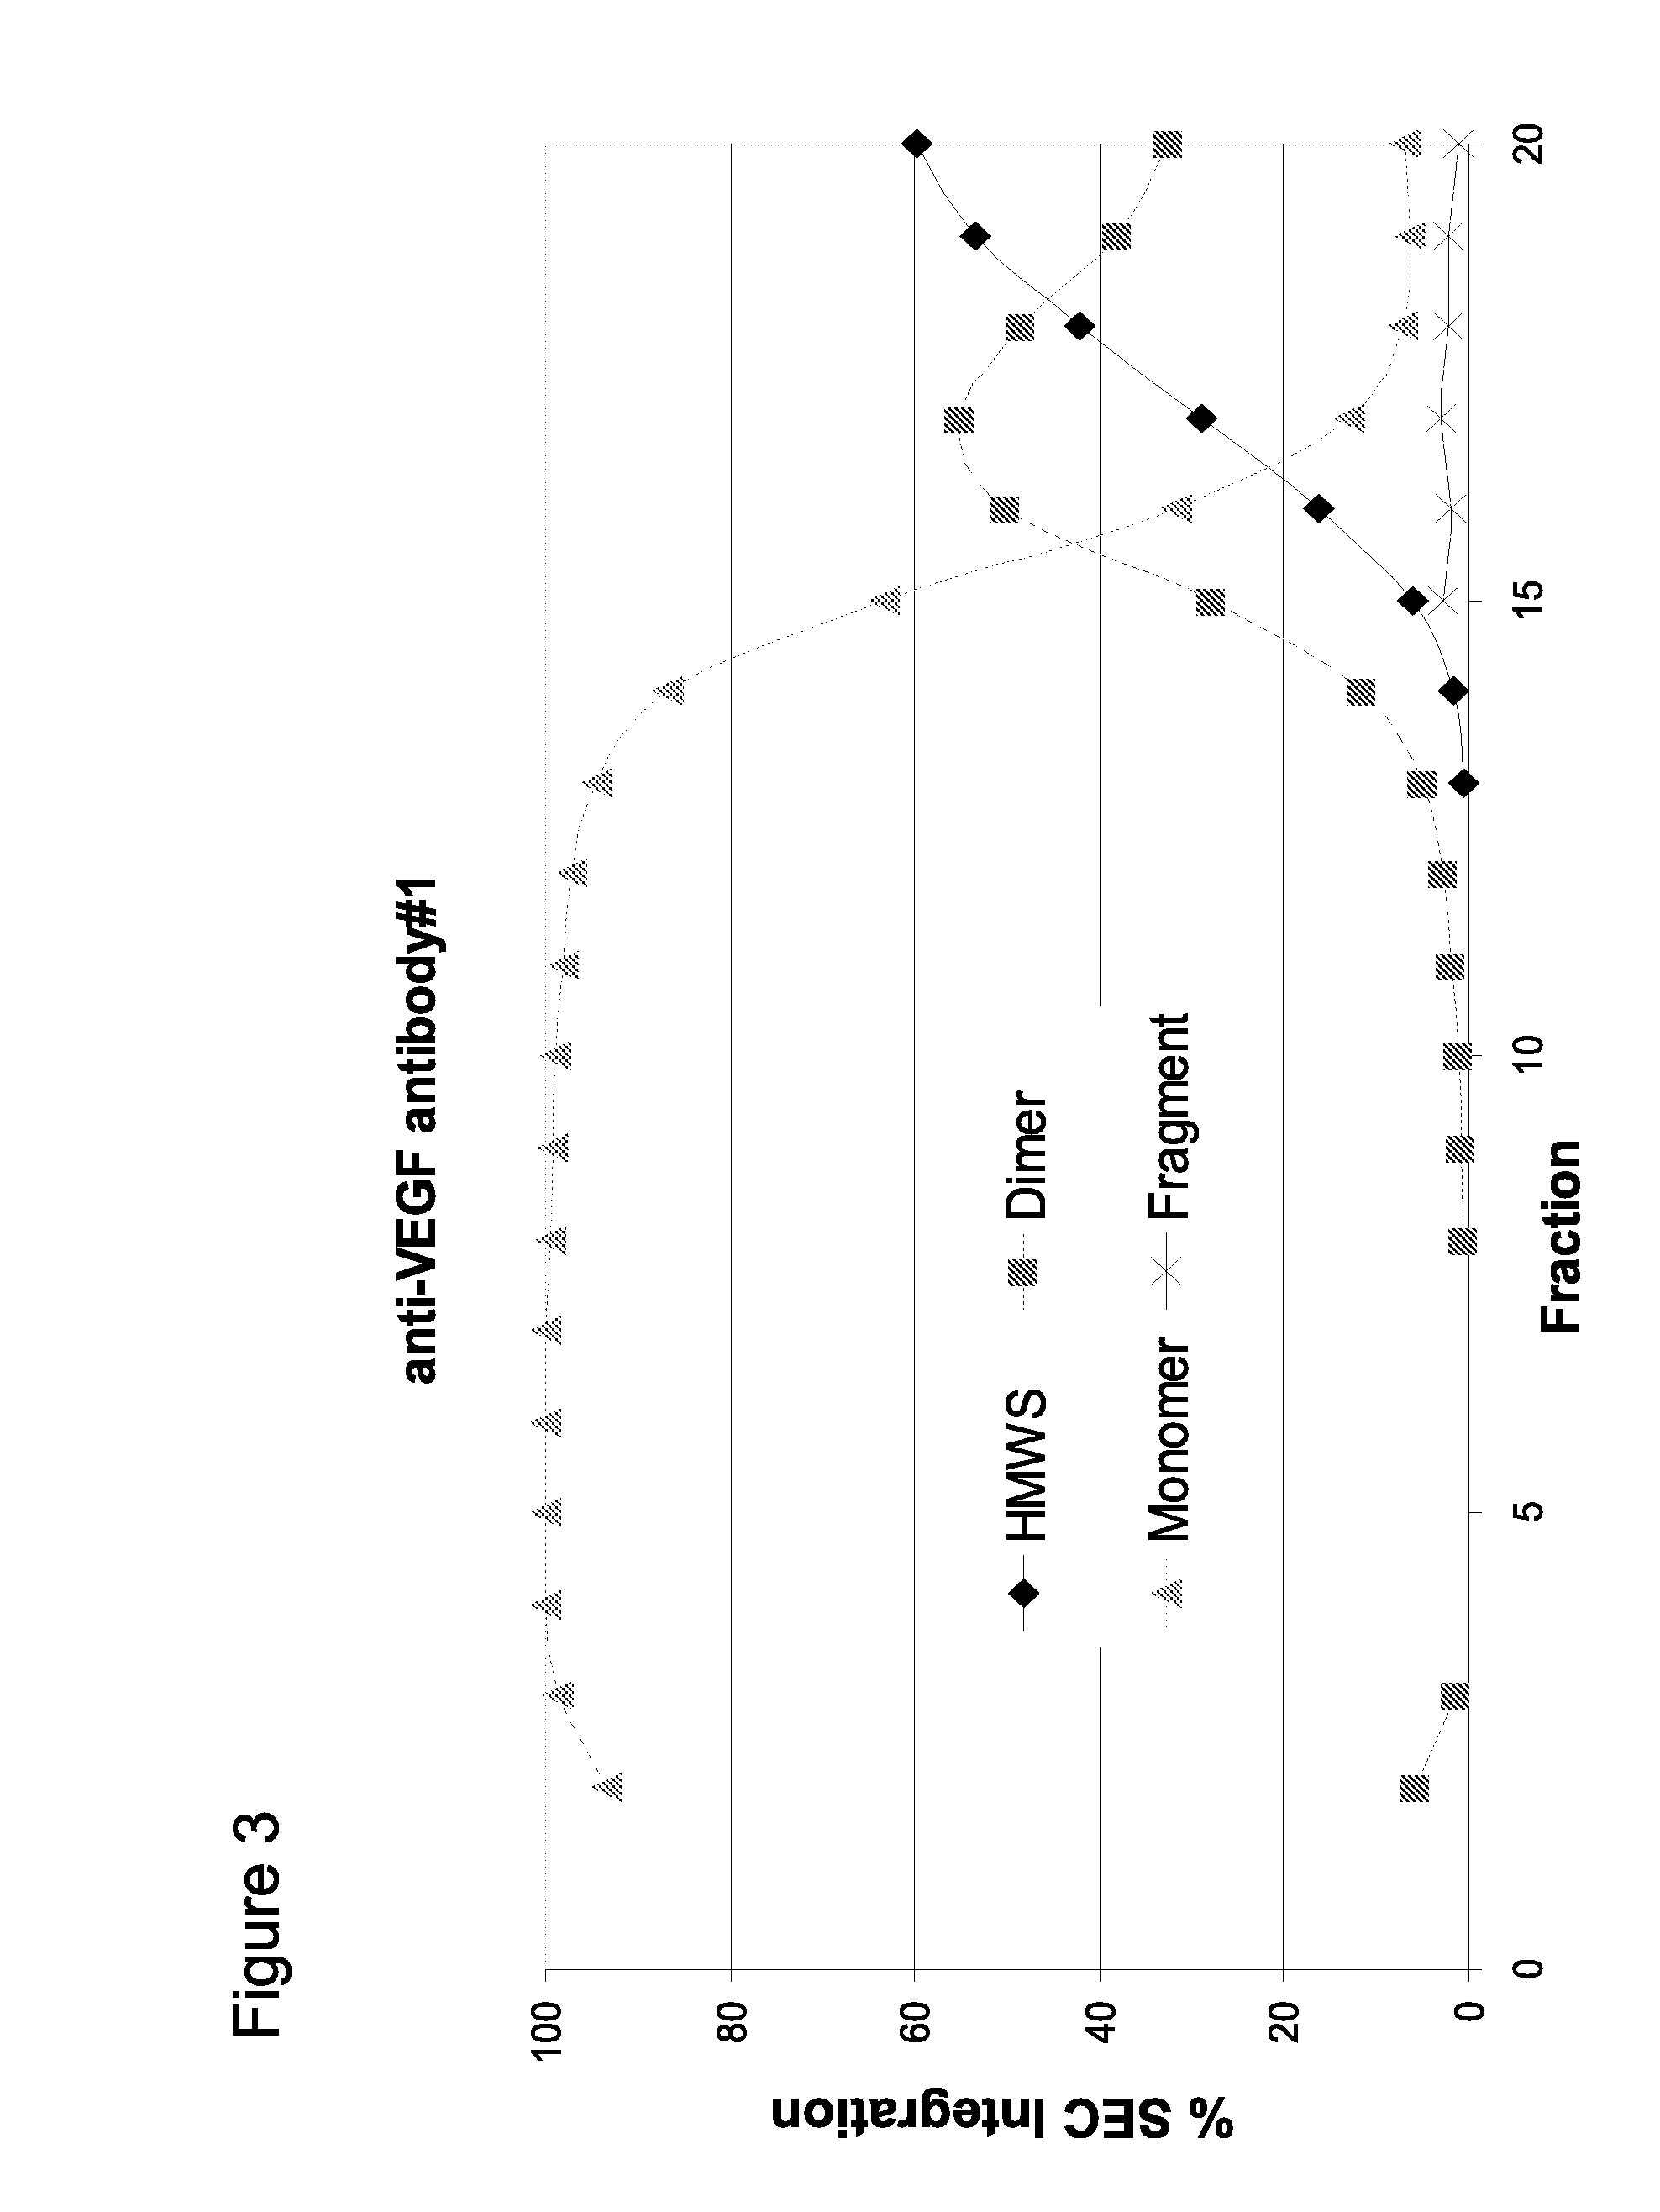 Enhanced protein purification through a modified protein a elution